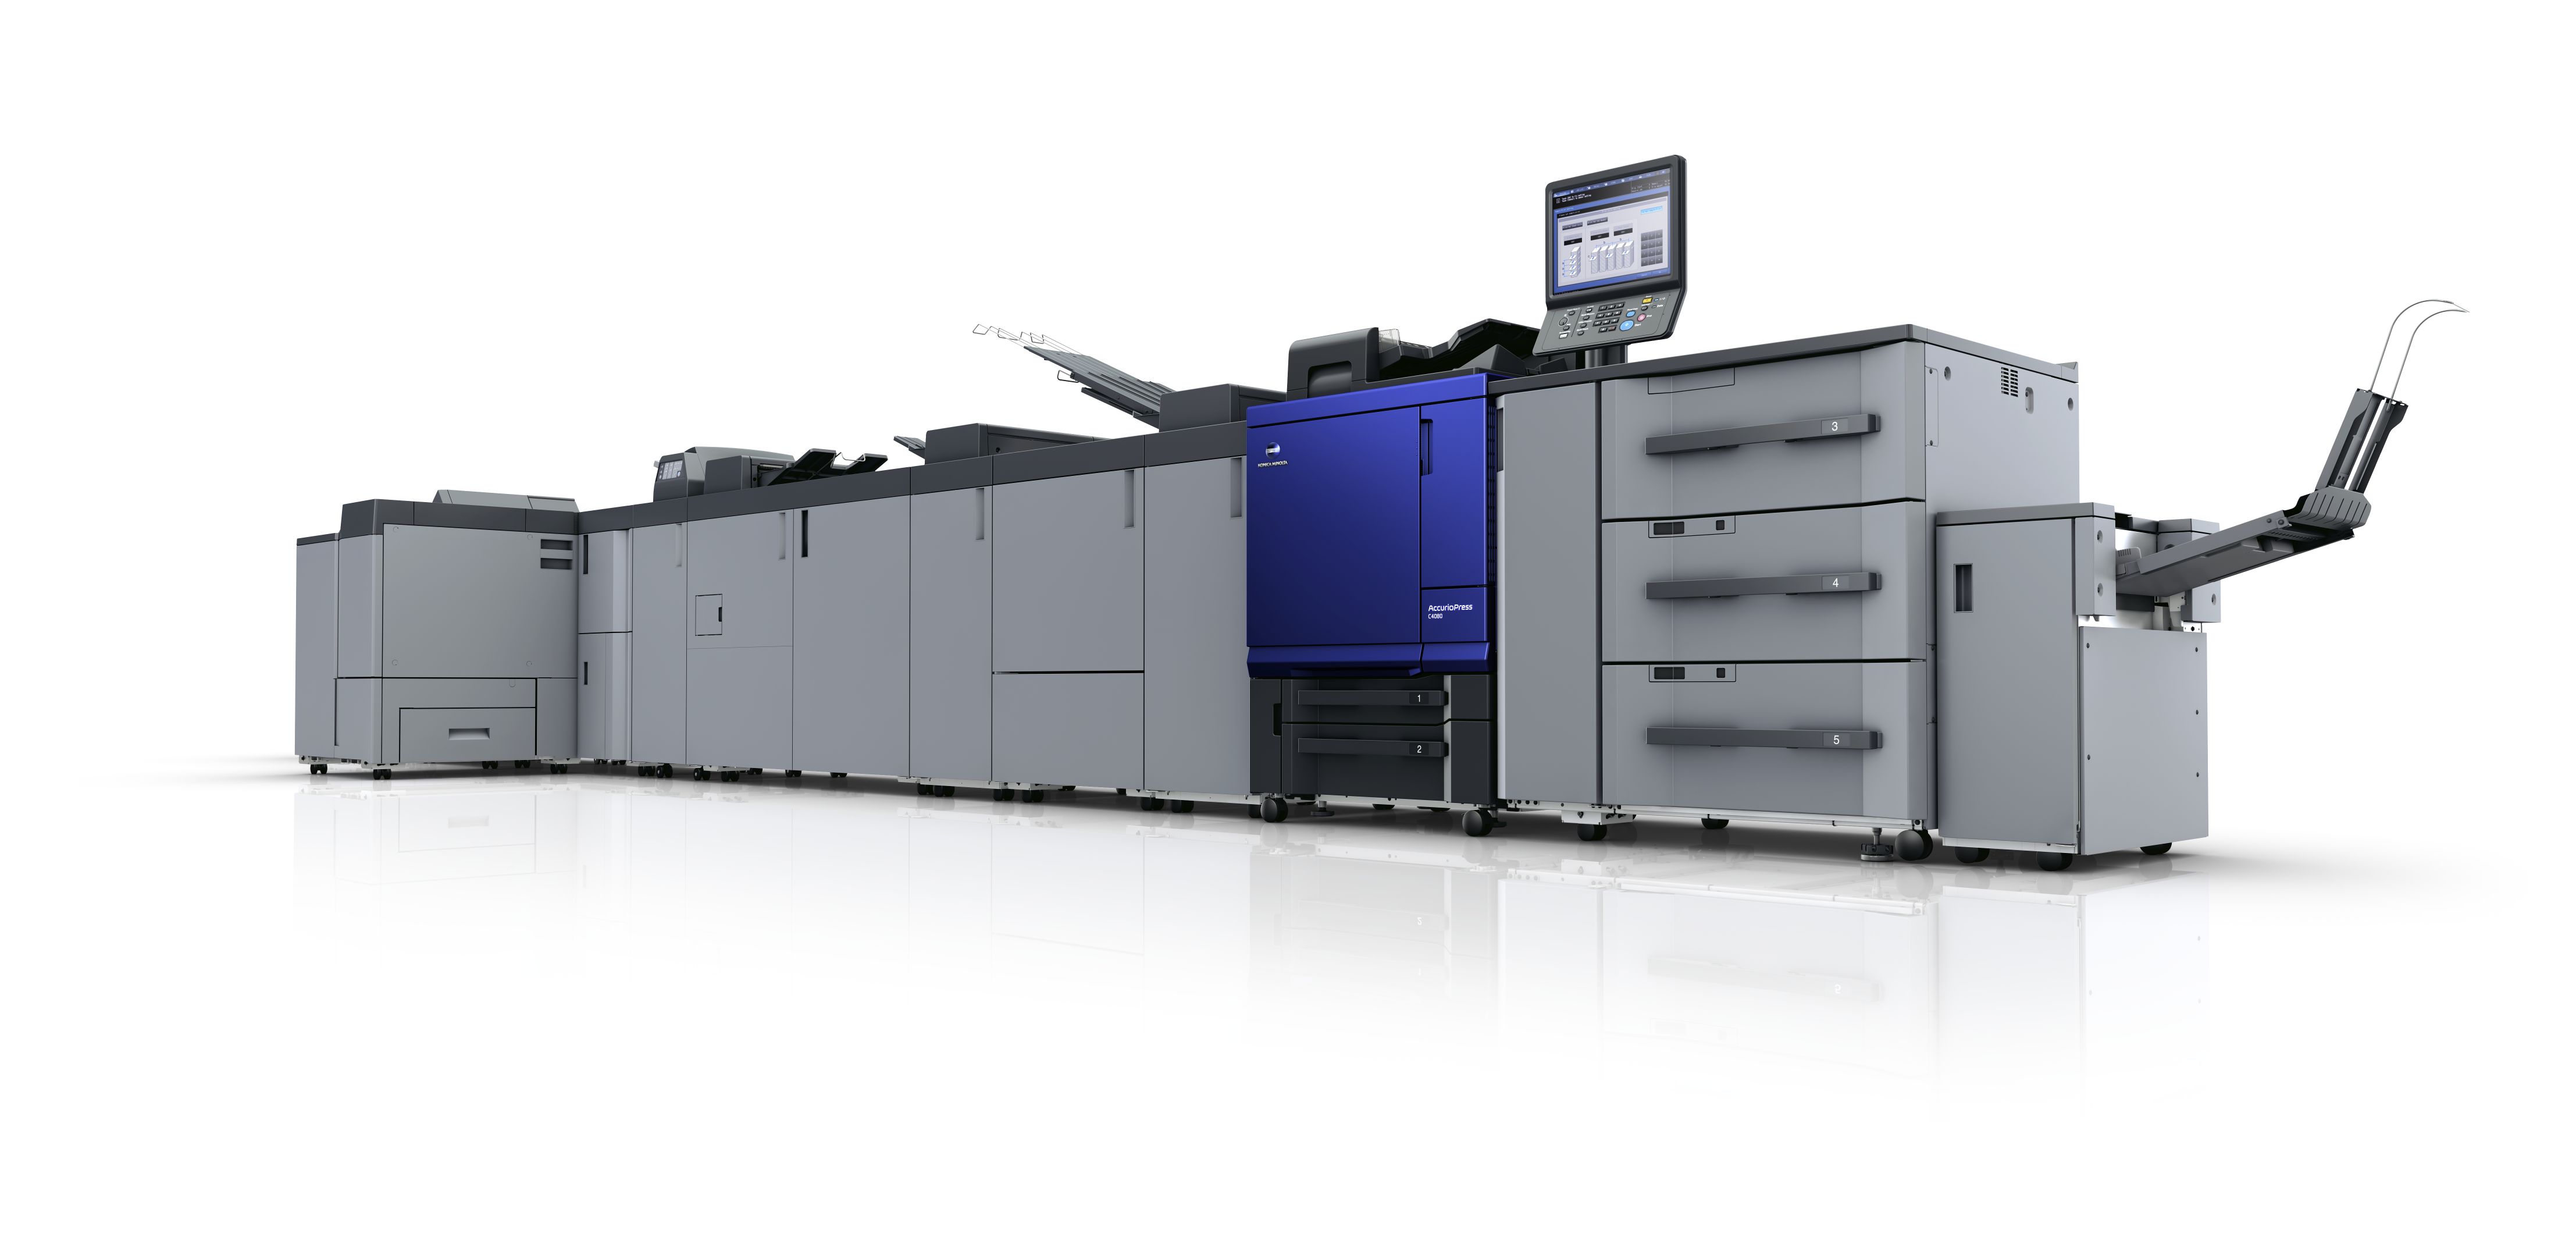 Konica Minolta's AccurioPress C4080 high-speed digital press offers robust and user-friendly production and is a perfect fit for businesses looking to expand their production capabilities with advanced automation and ease of use for various applications.